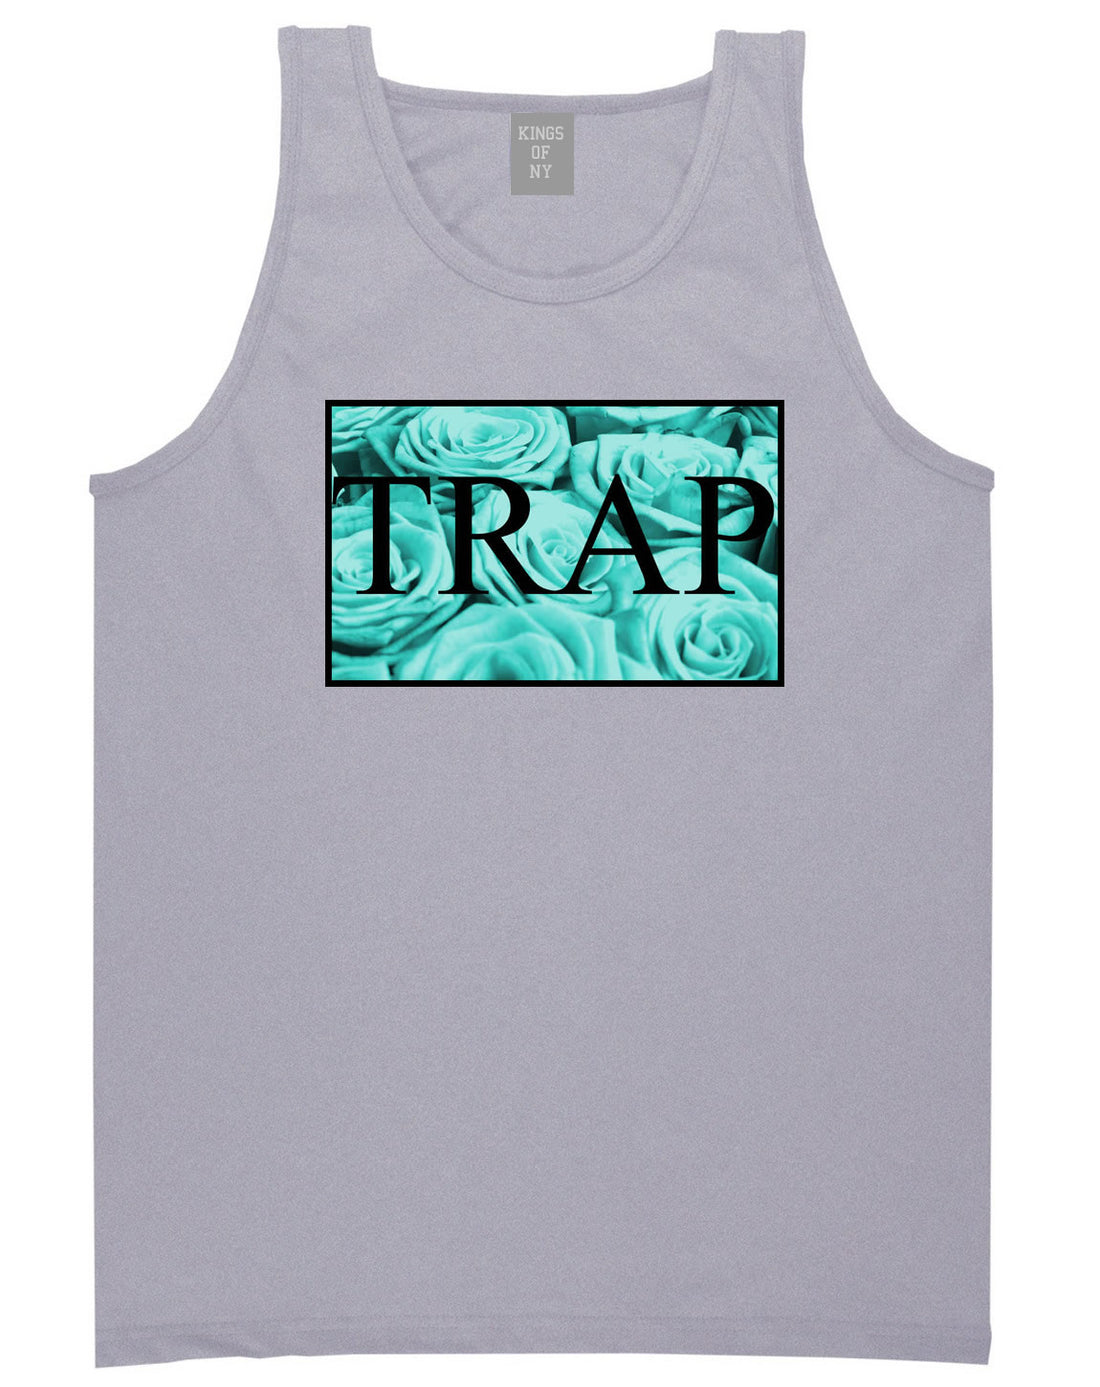 Trap Floral Style Hood Music Hood Dope Tank Top In Grey by Kings Of NY